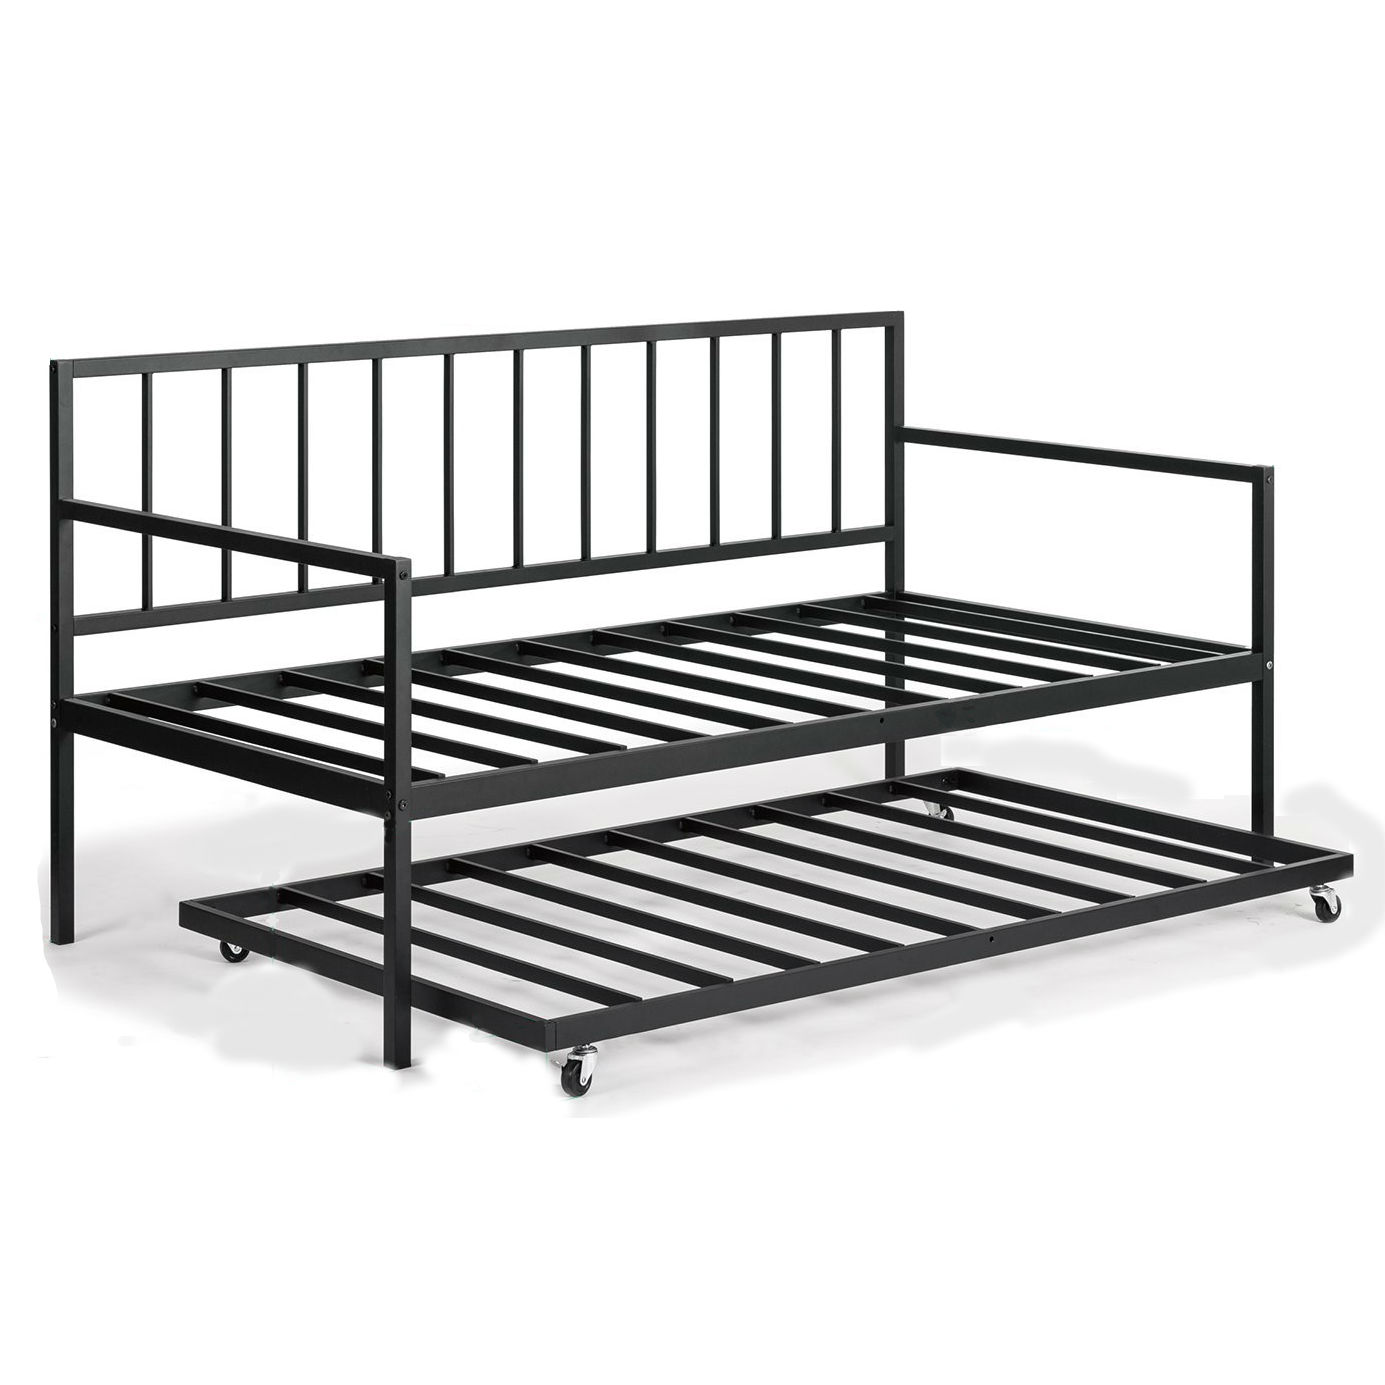 Modern Black Metal Daybed, Twin Bed Frame And Trundle